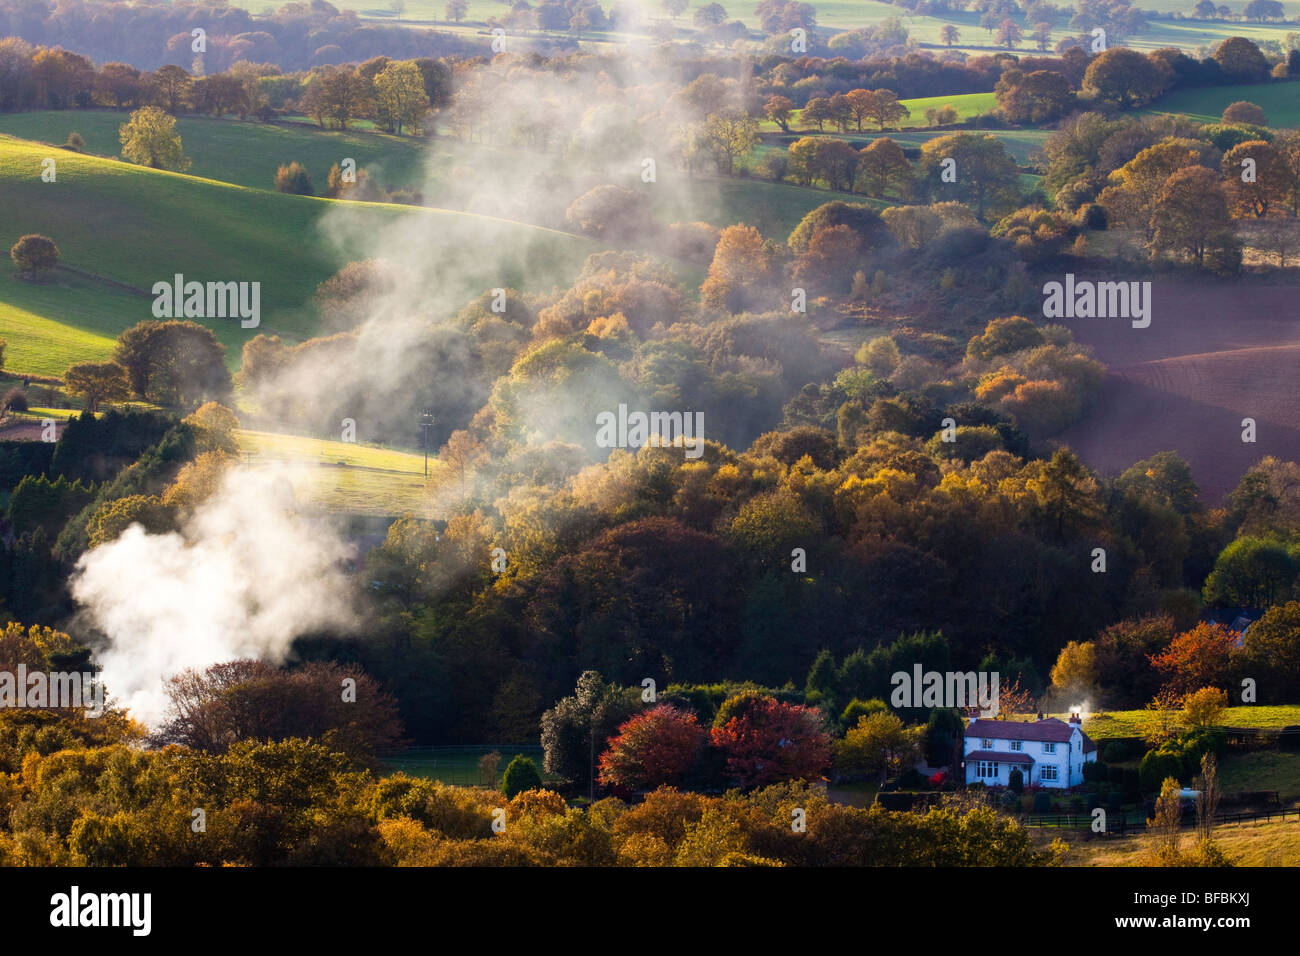 England, Staffordshire / Worcestershire. Smoke from burning in the countryside near Kinver - Viewed from Kinver Edge Stock Photo